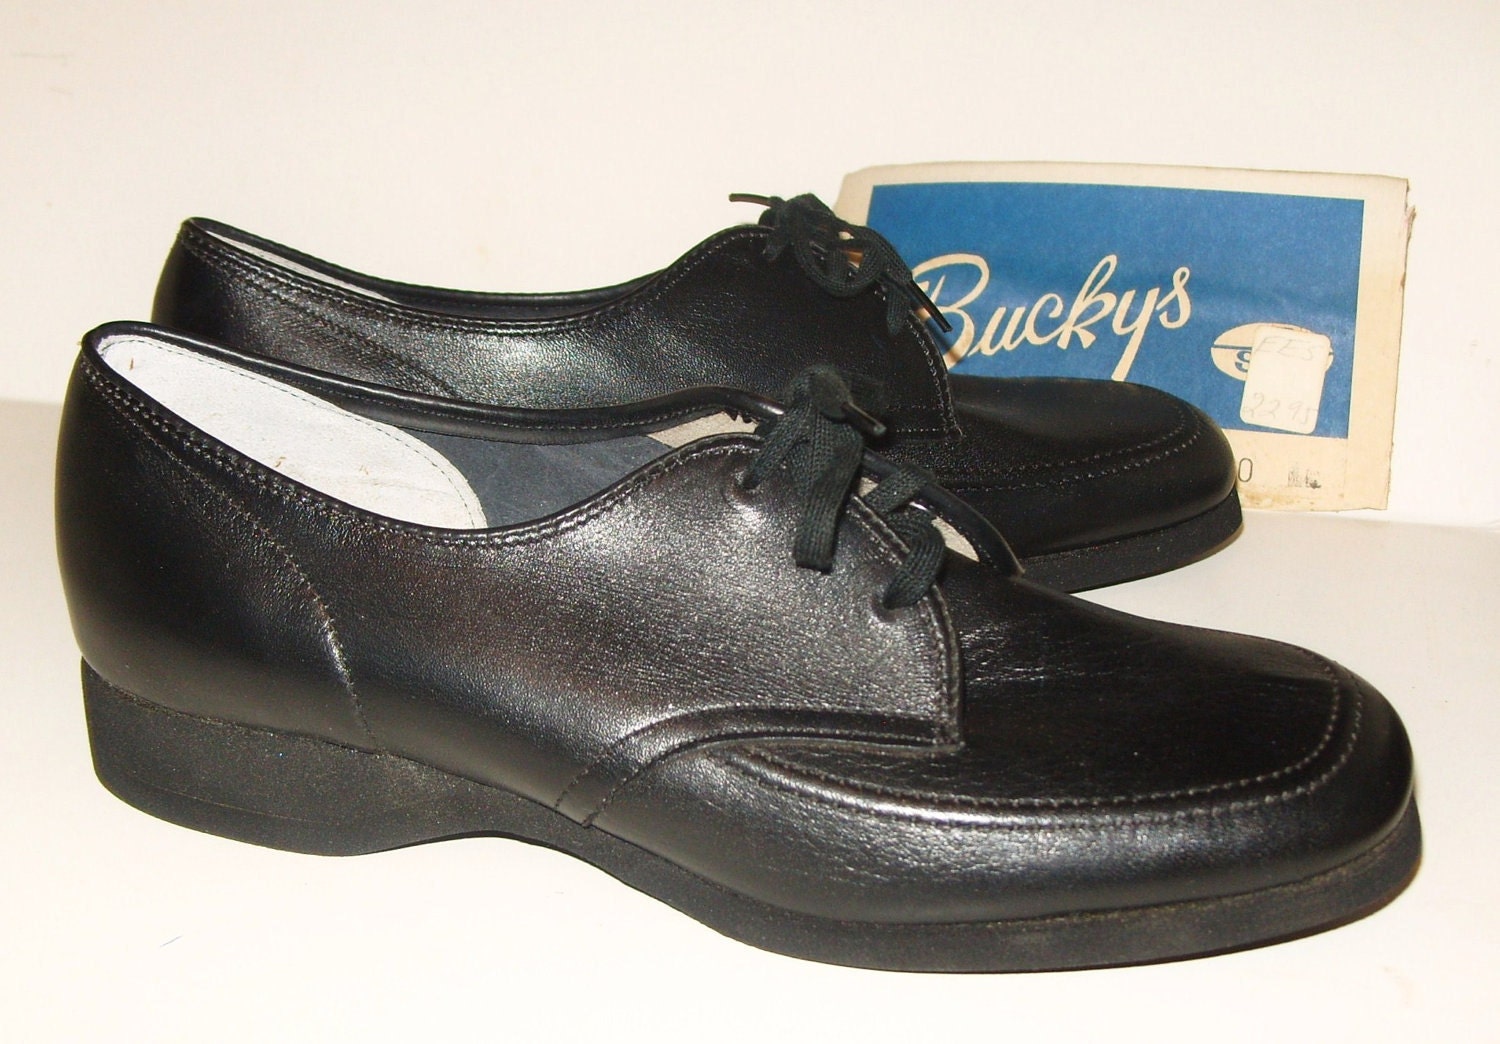 Vintage Black Shoes Rockabilly Waitress Shoes Bucky's by